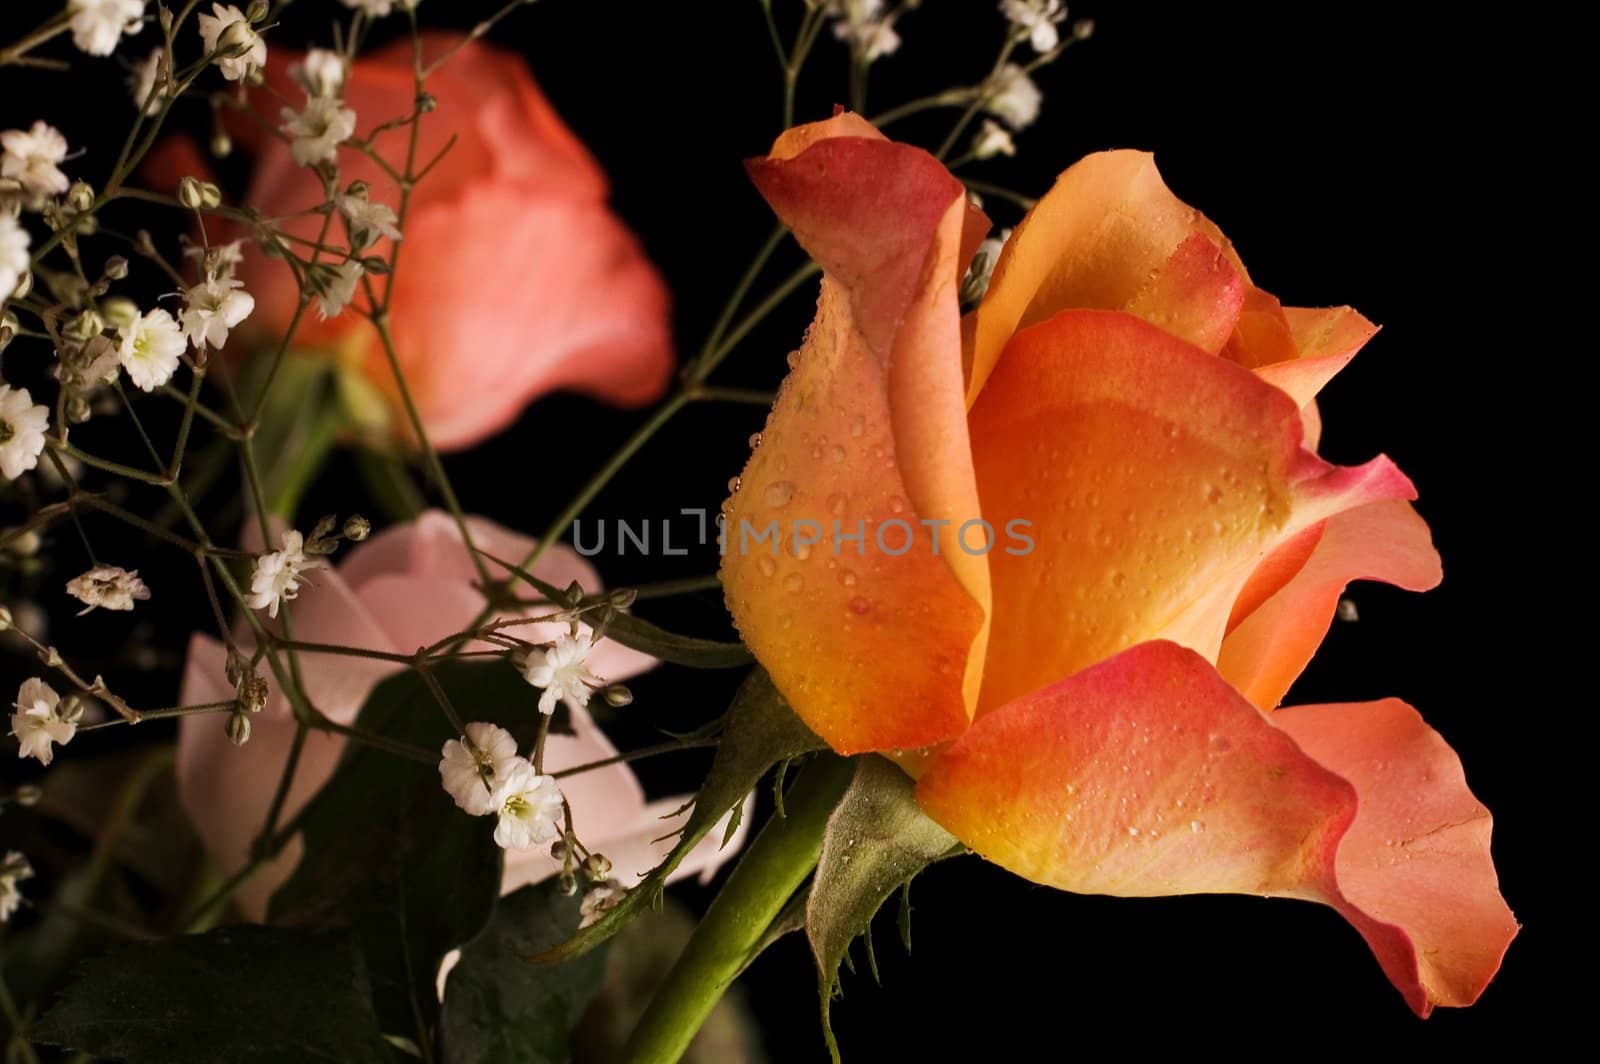 Rose in a bouquet  with droplets on black background with shallow depth of field